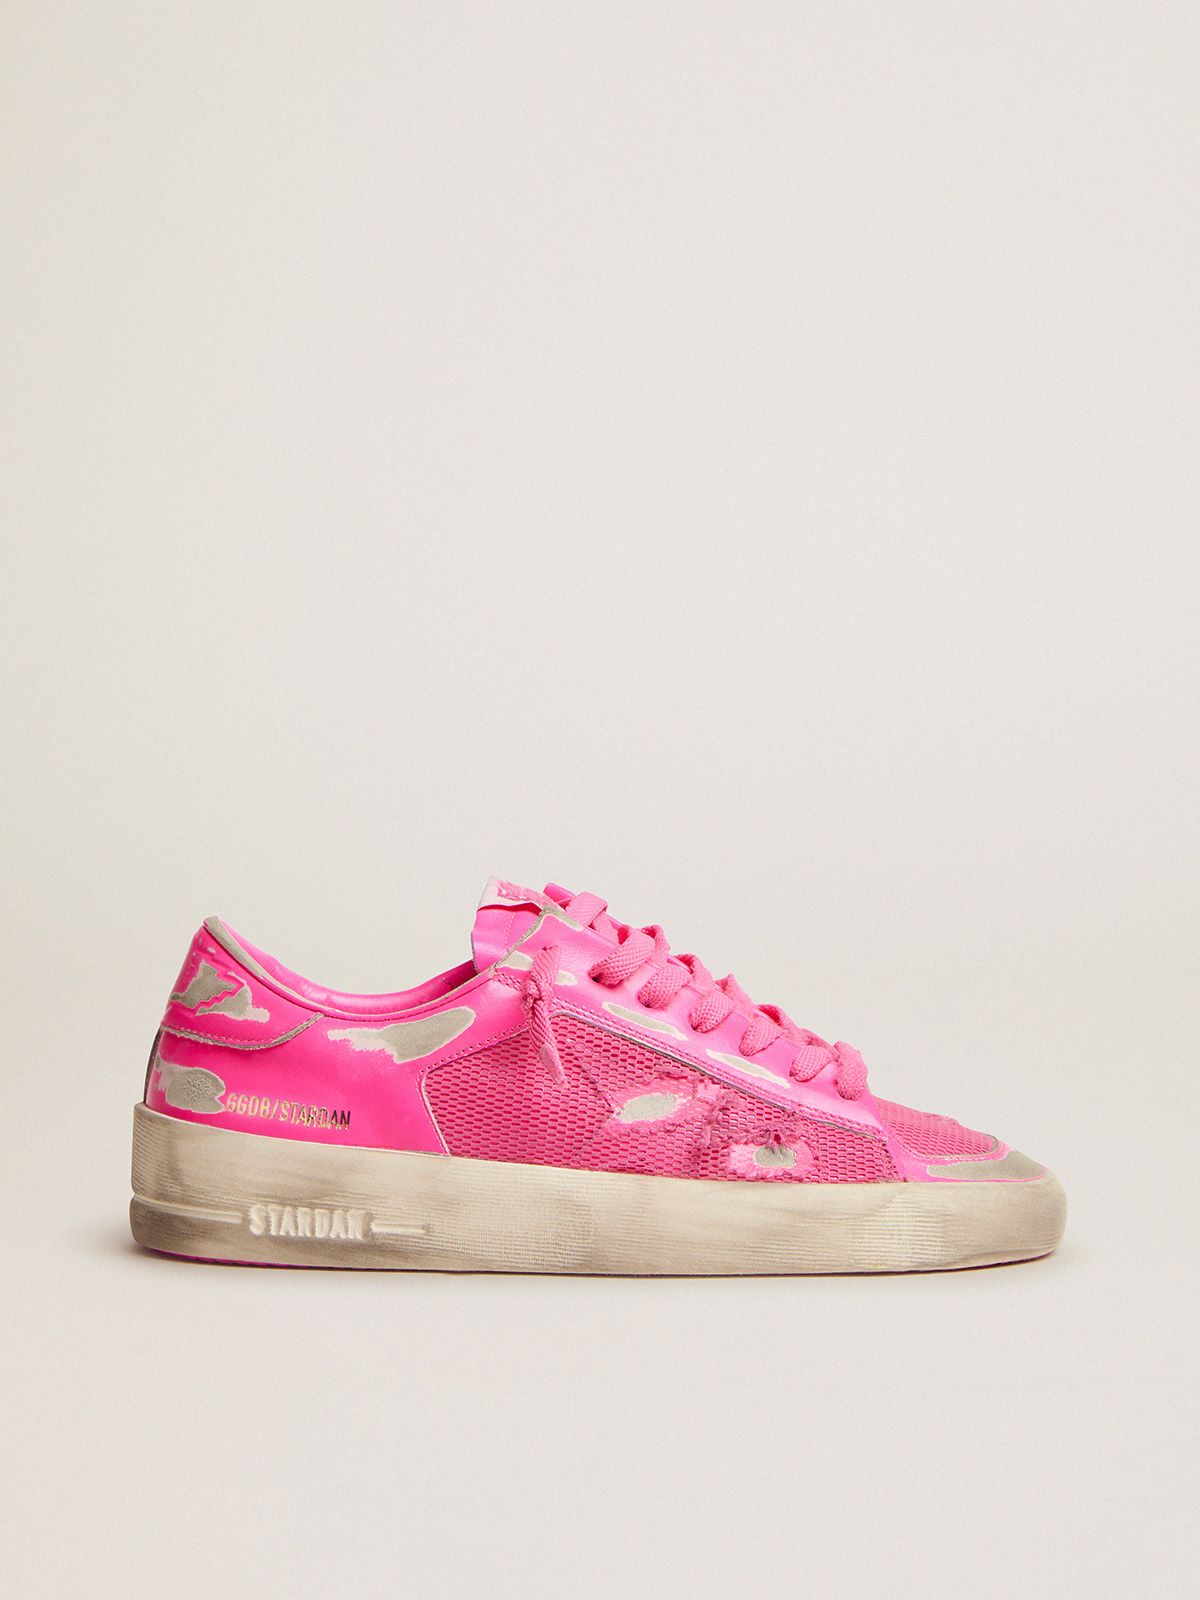 Golden Goose Saldi Uomo Stardan sneakers in fluorescent pink leather and mesh